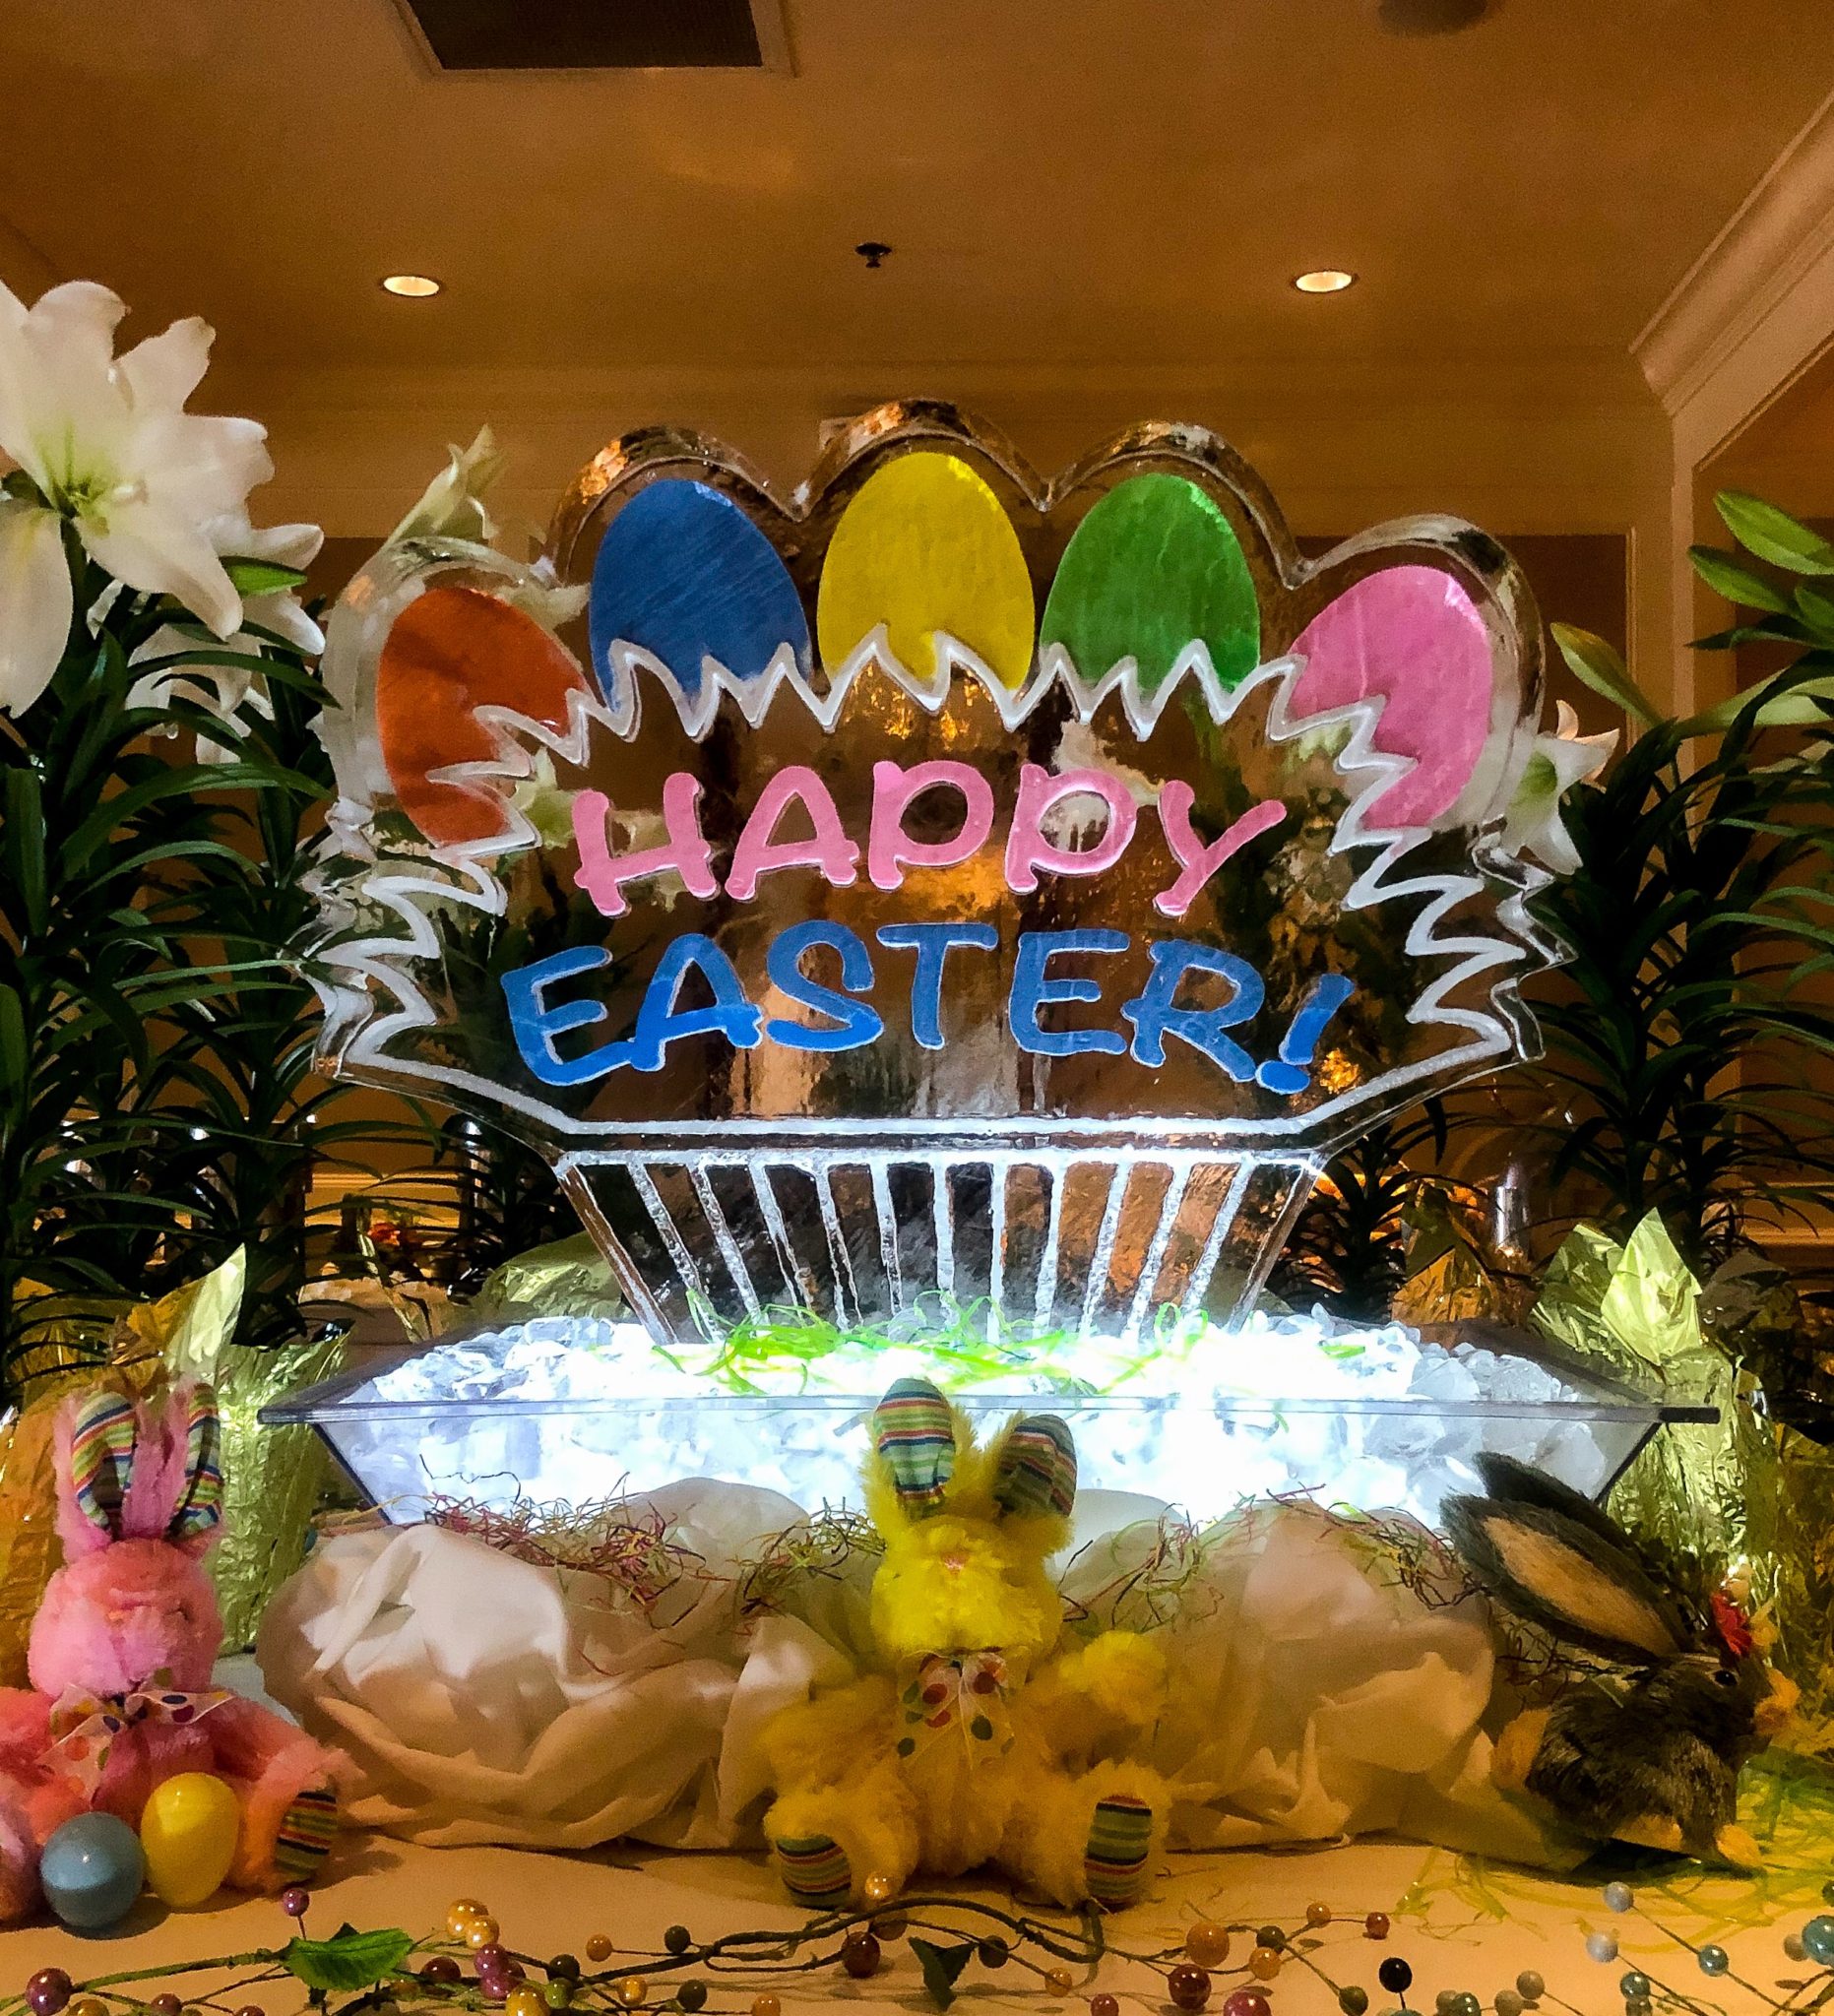 Happy Easter holiday ice sculpture, with color eggs and lettering